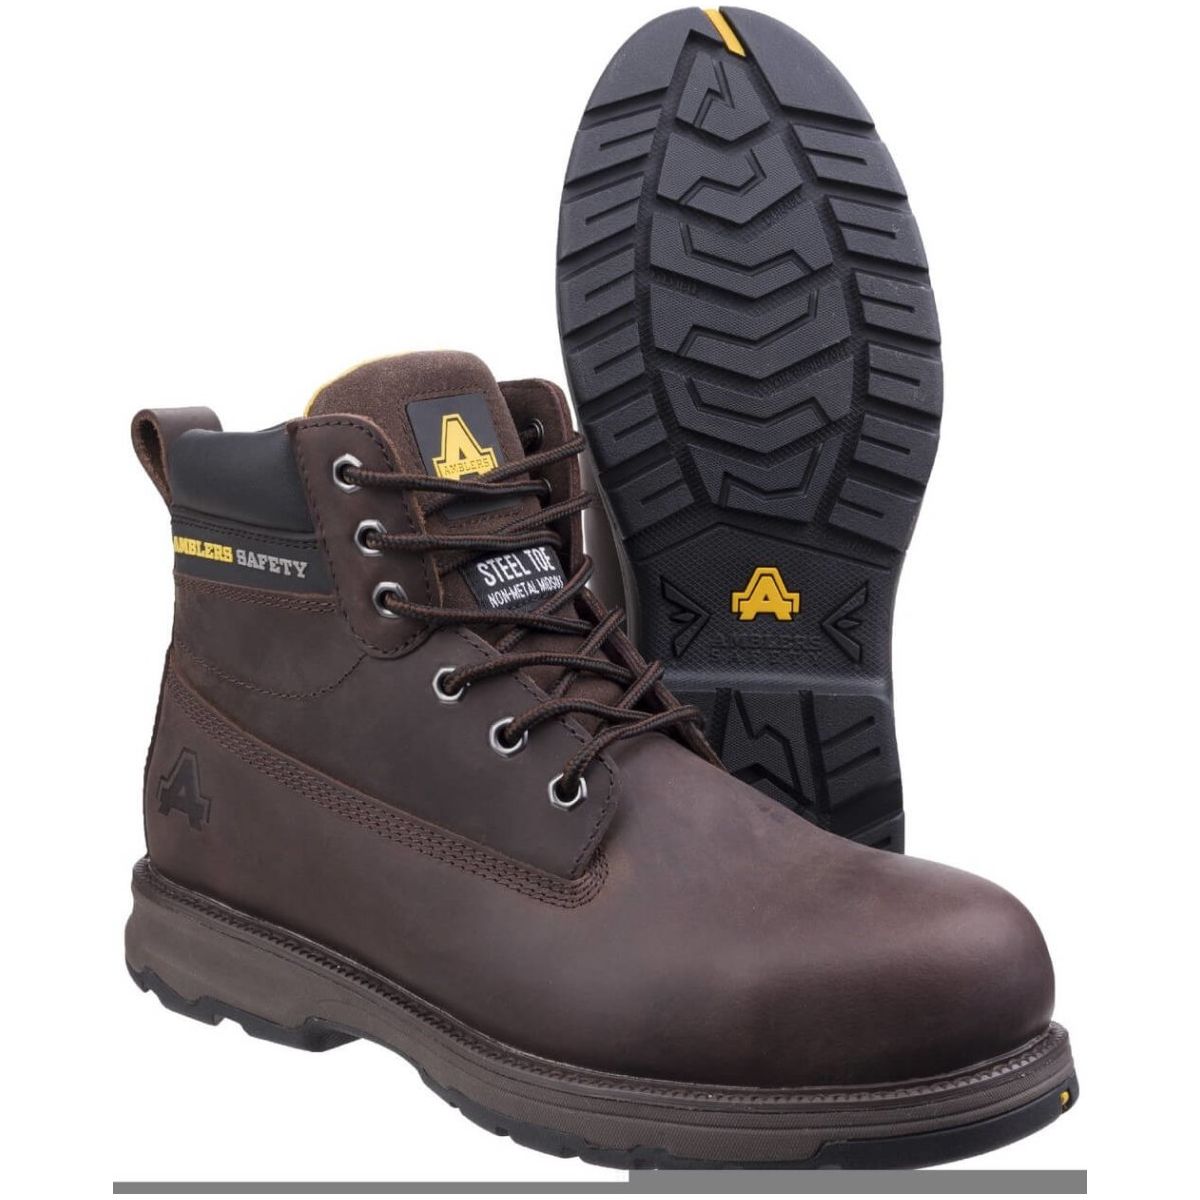 Amblers As170 Leather Safety Boots Mens - workweargurus.com